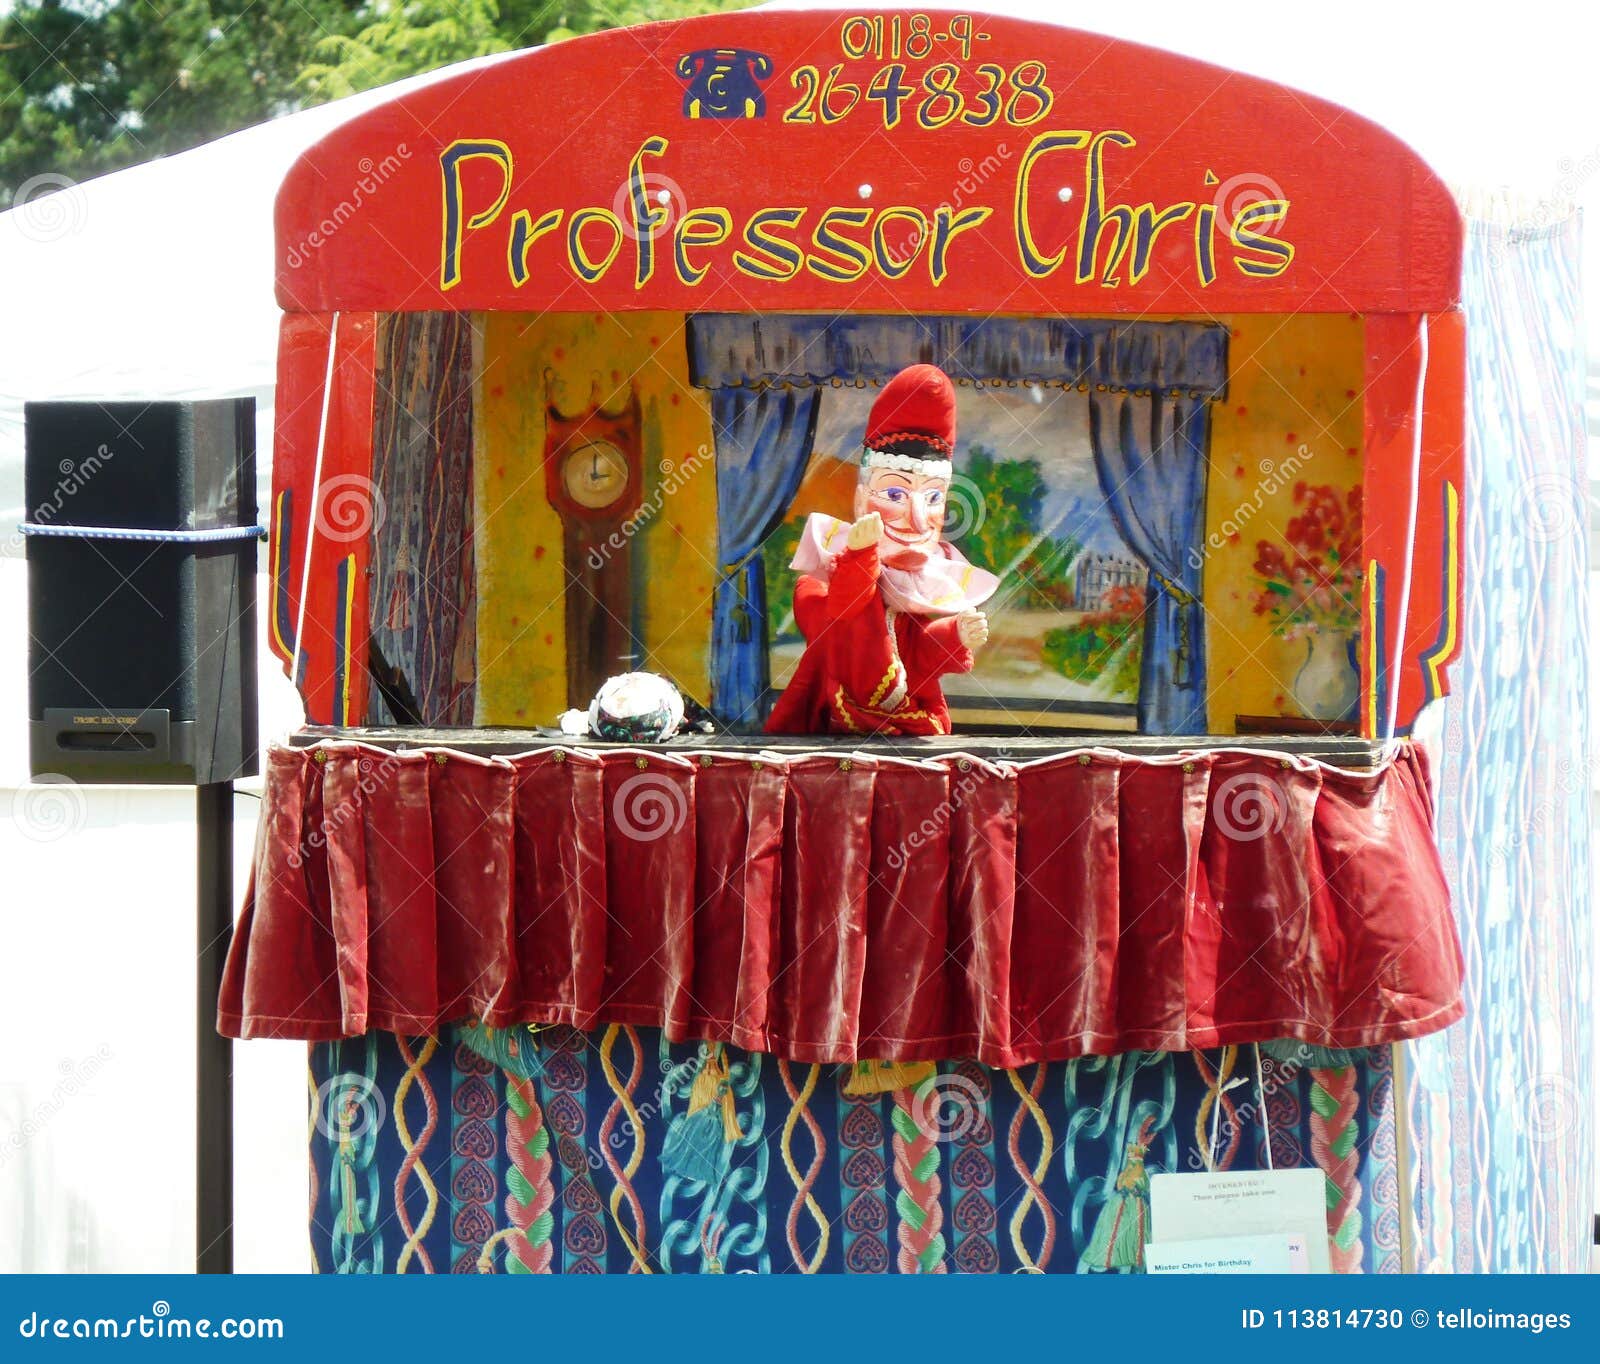 Punch And Judy Booth Brown Stock Illustration - Download Image Now